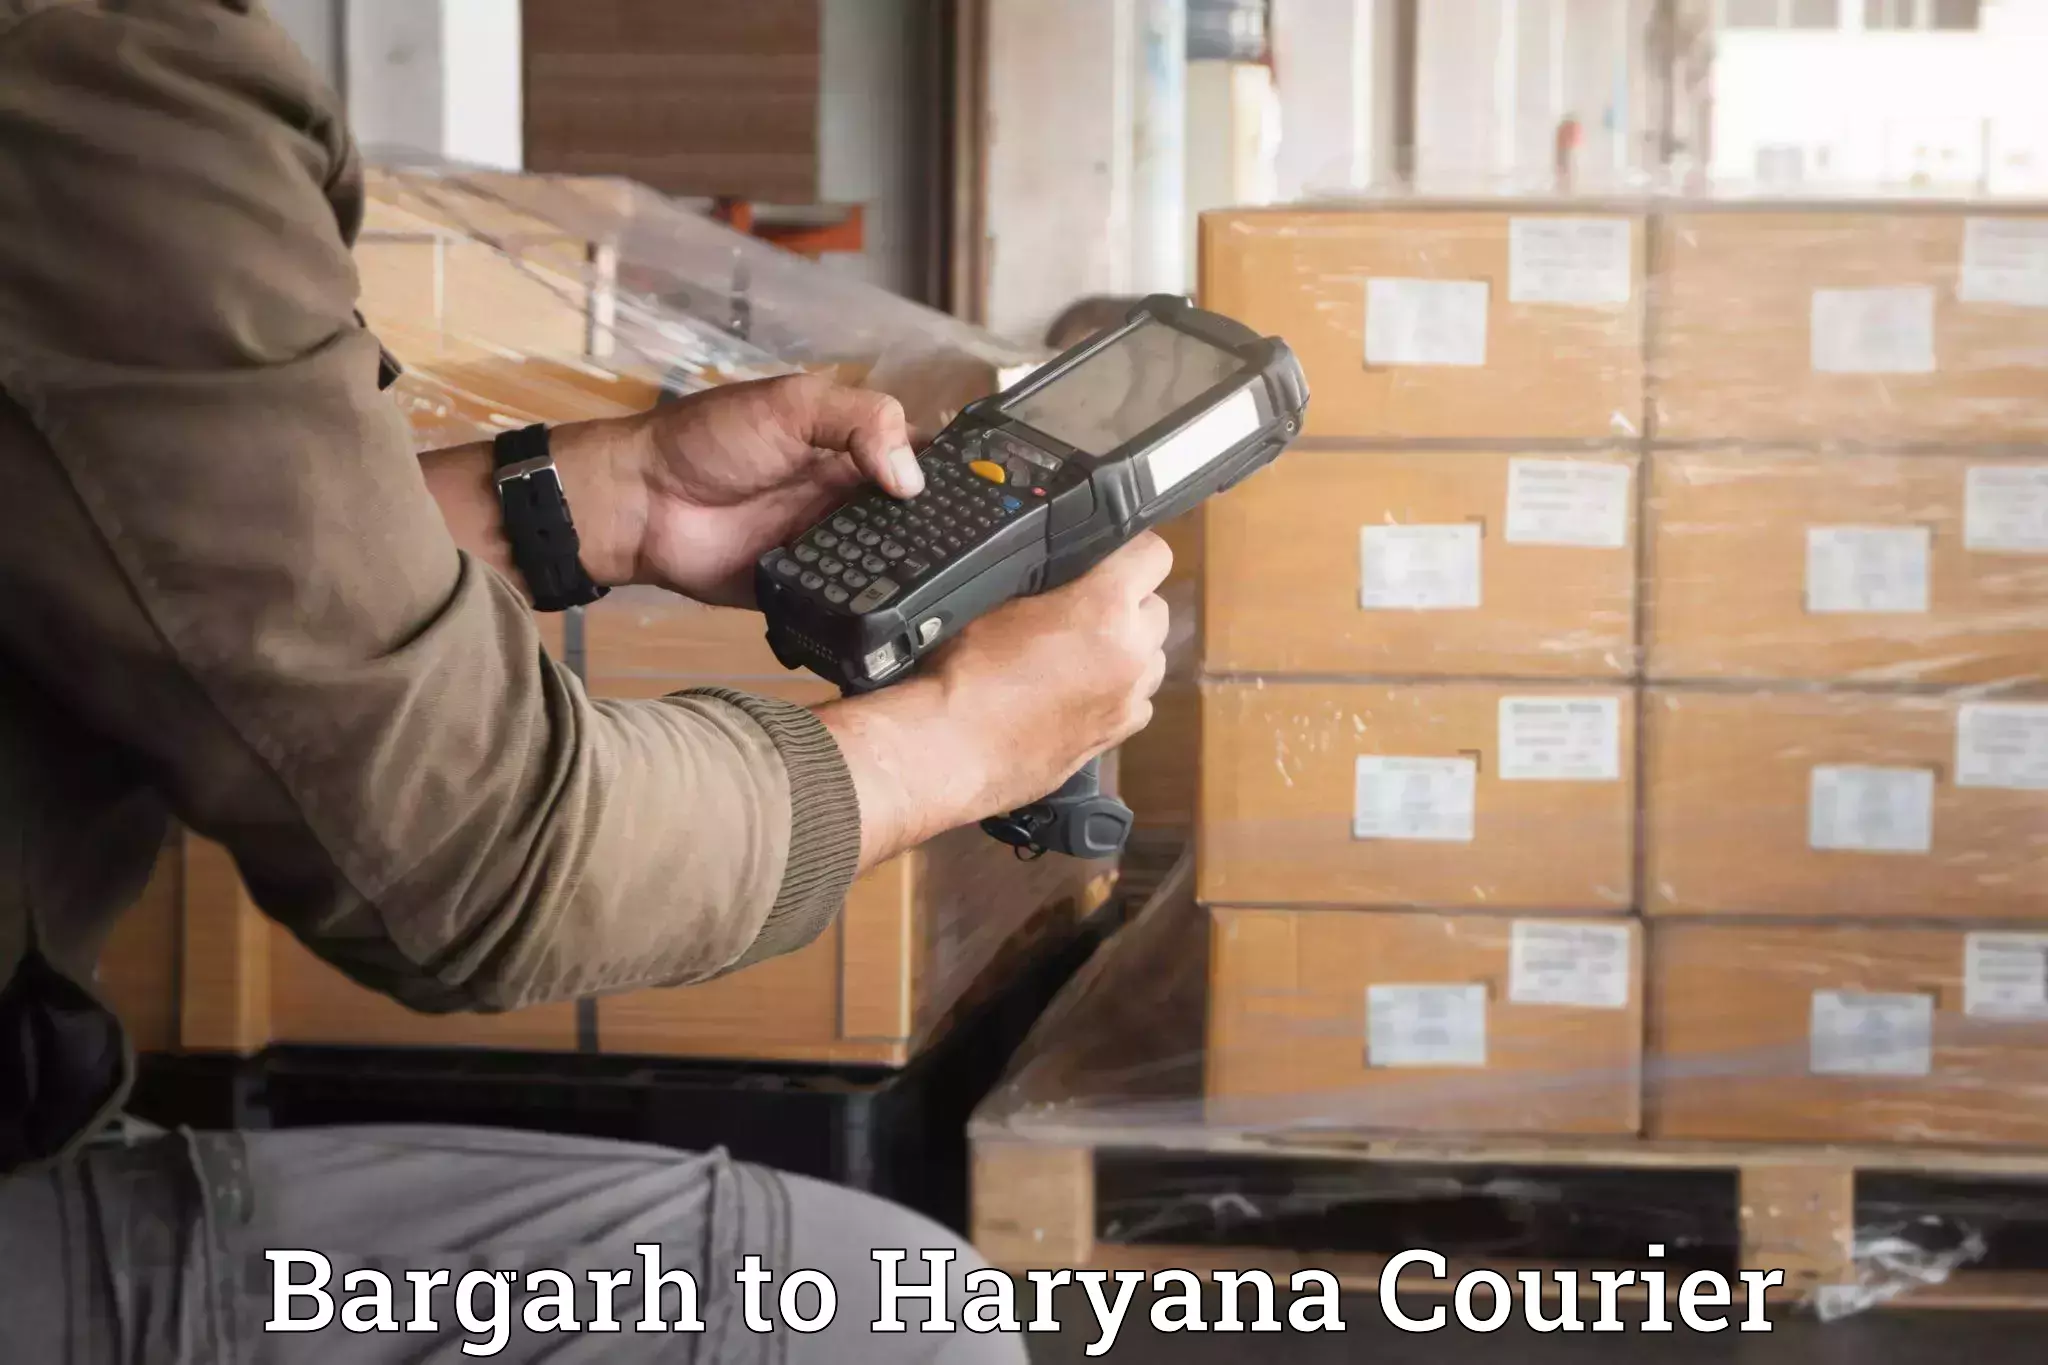 Efficient moving company Bargarh to Palwal